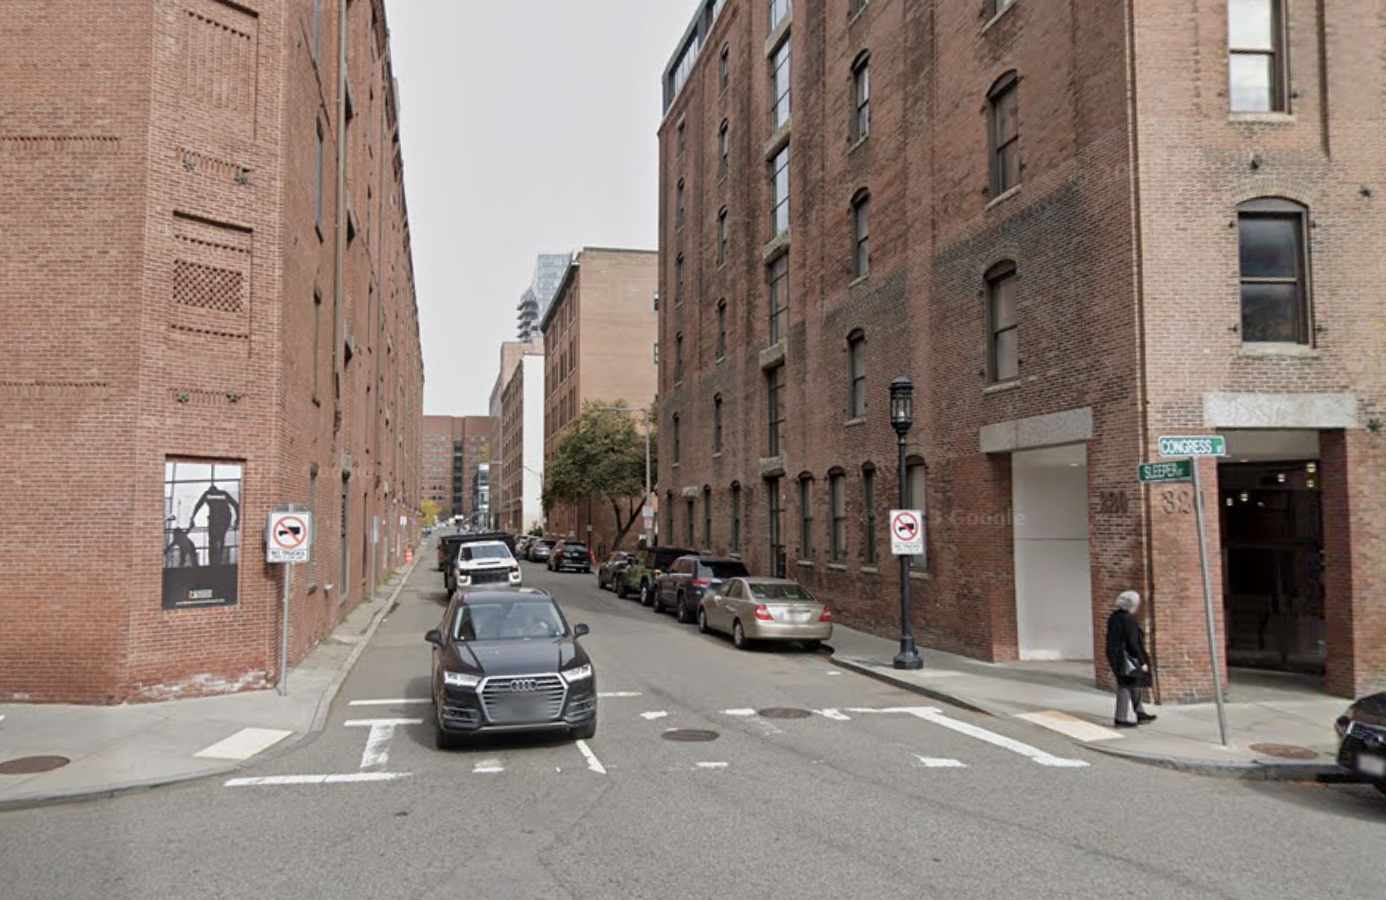 A narrow street lined with parked cars and mid-rise brick buildings.